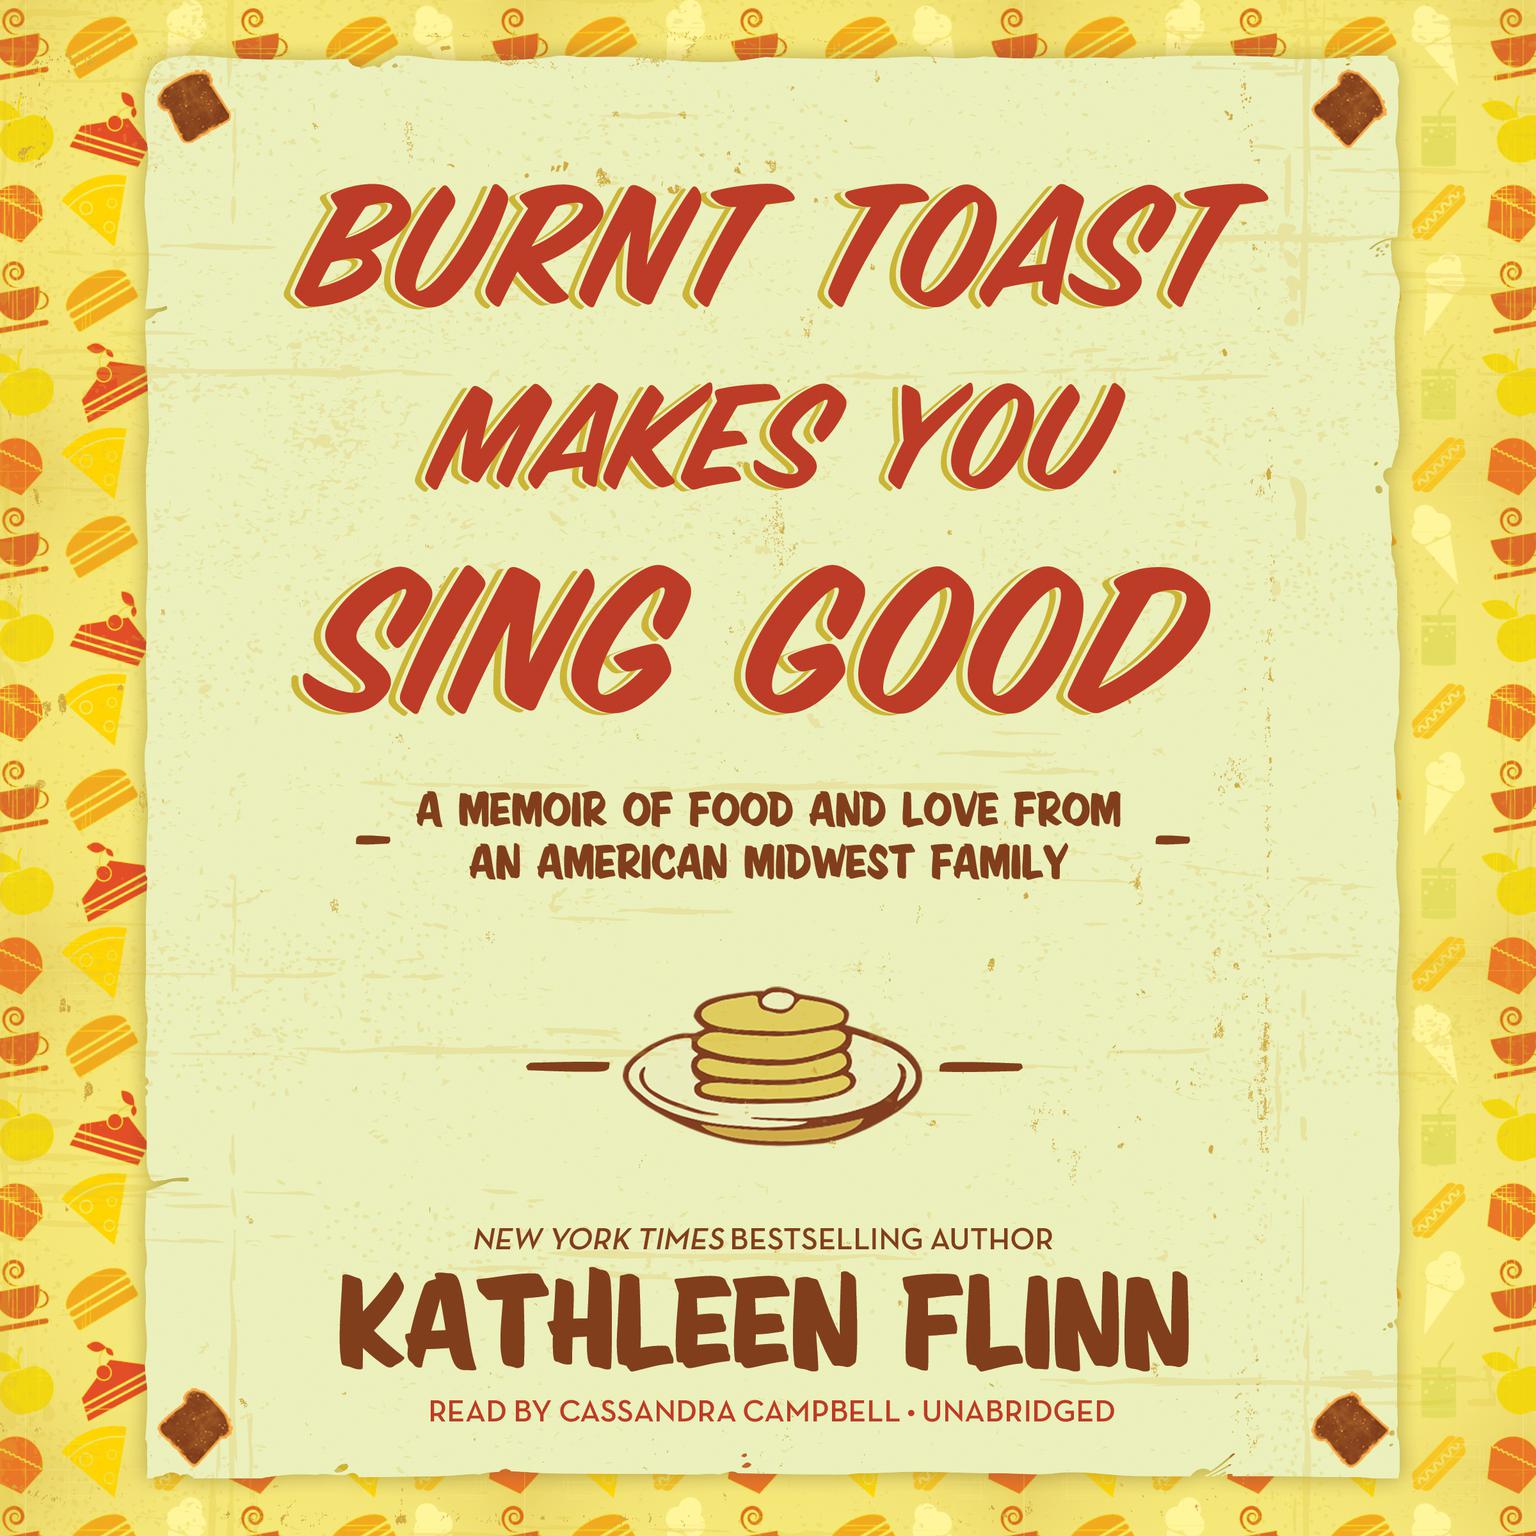 Burnt Toast Makes You Sing Good: A Memoir of Food and Love from an American Midwest Family Audiobook, by Kathleen Flinn